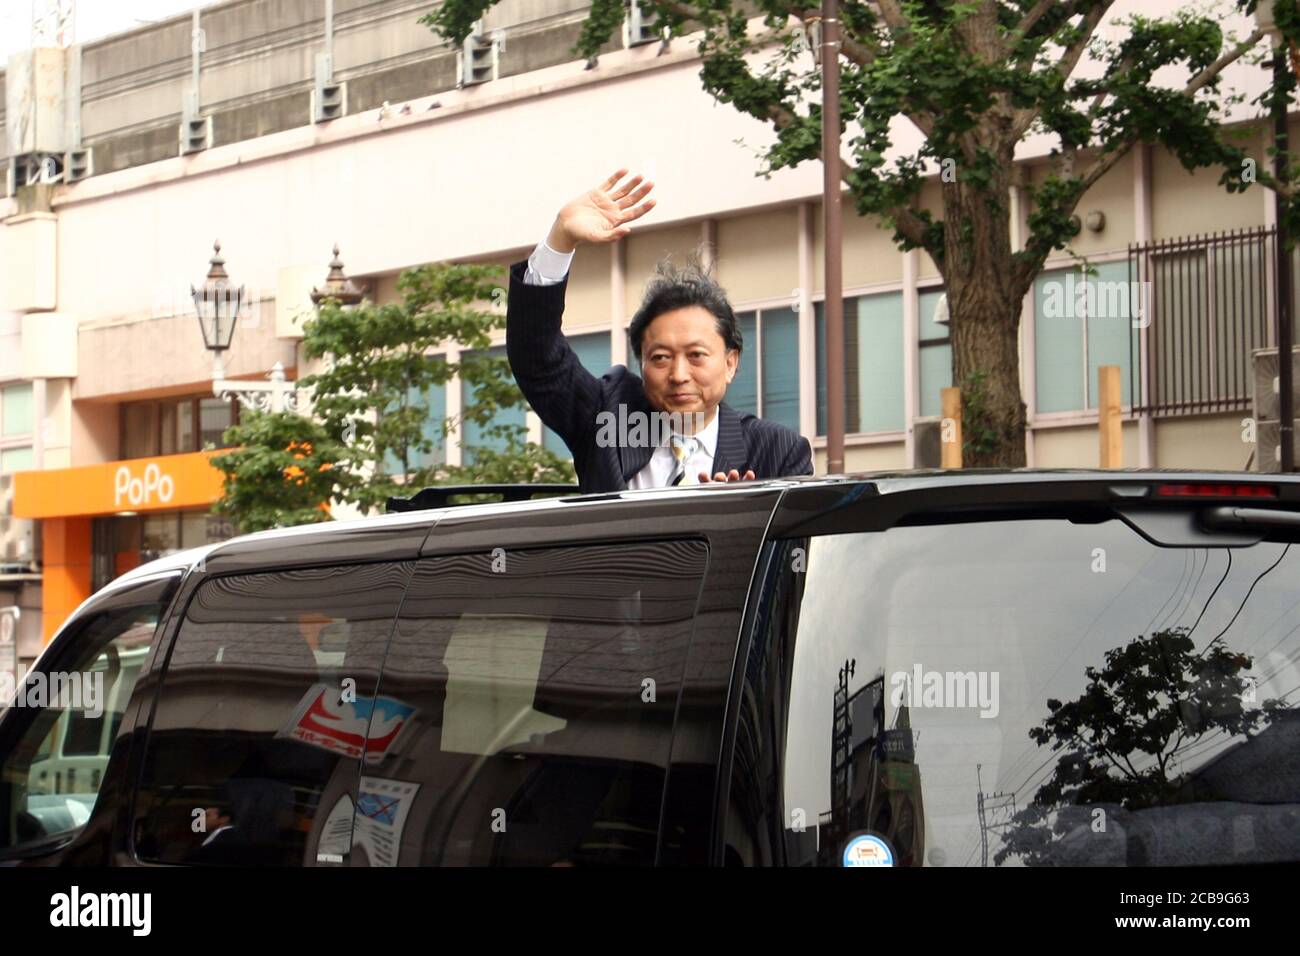 Yukio Hatoyama seen cheering supporters in the streets of Tokyo. Yukio Hatoyama, the leader of the Democratic Party of Japan performed a street oratory to 'take the seat of the first party from the Liberal Democratic Party in Tokyo congressist election' at the Edogawa-ku, Tokyo Koiwa station square. Stock Photo